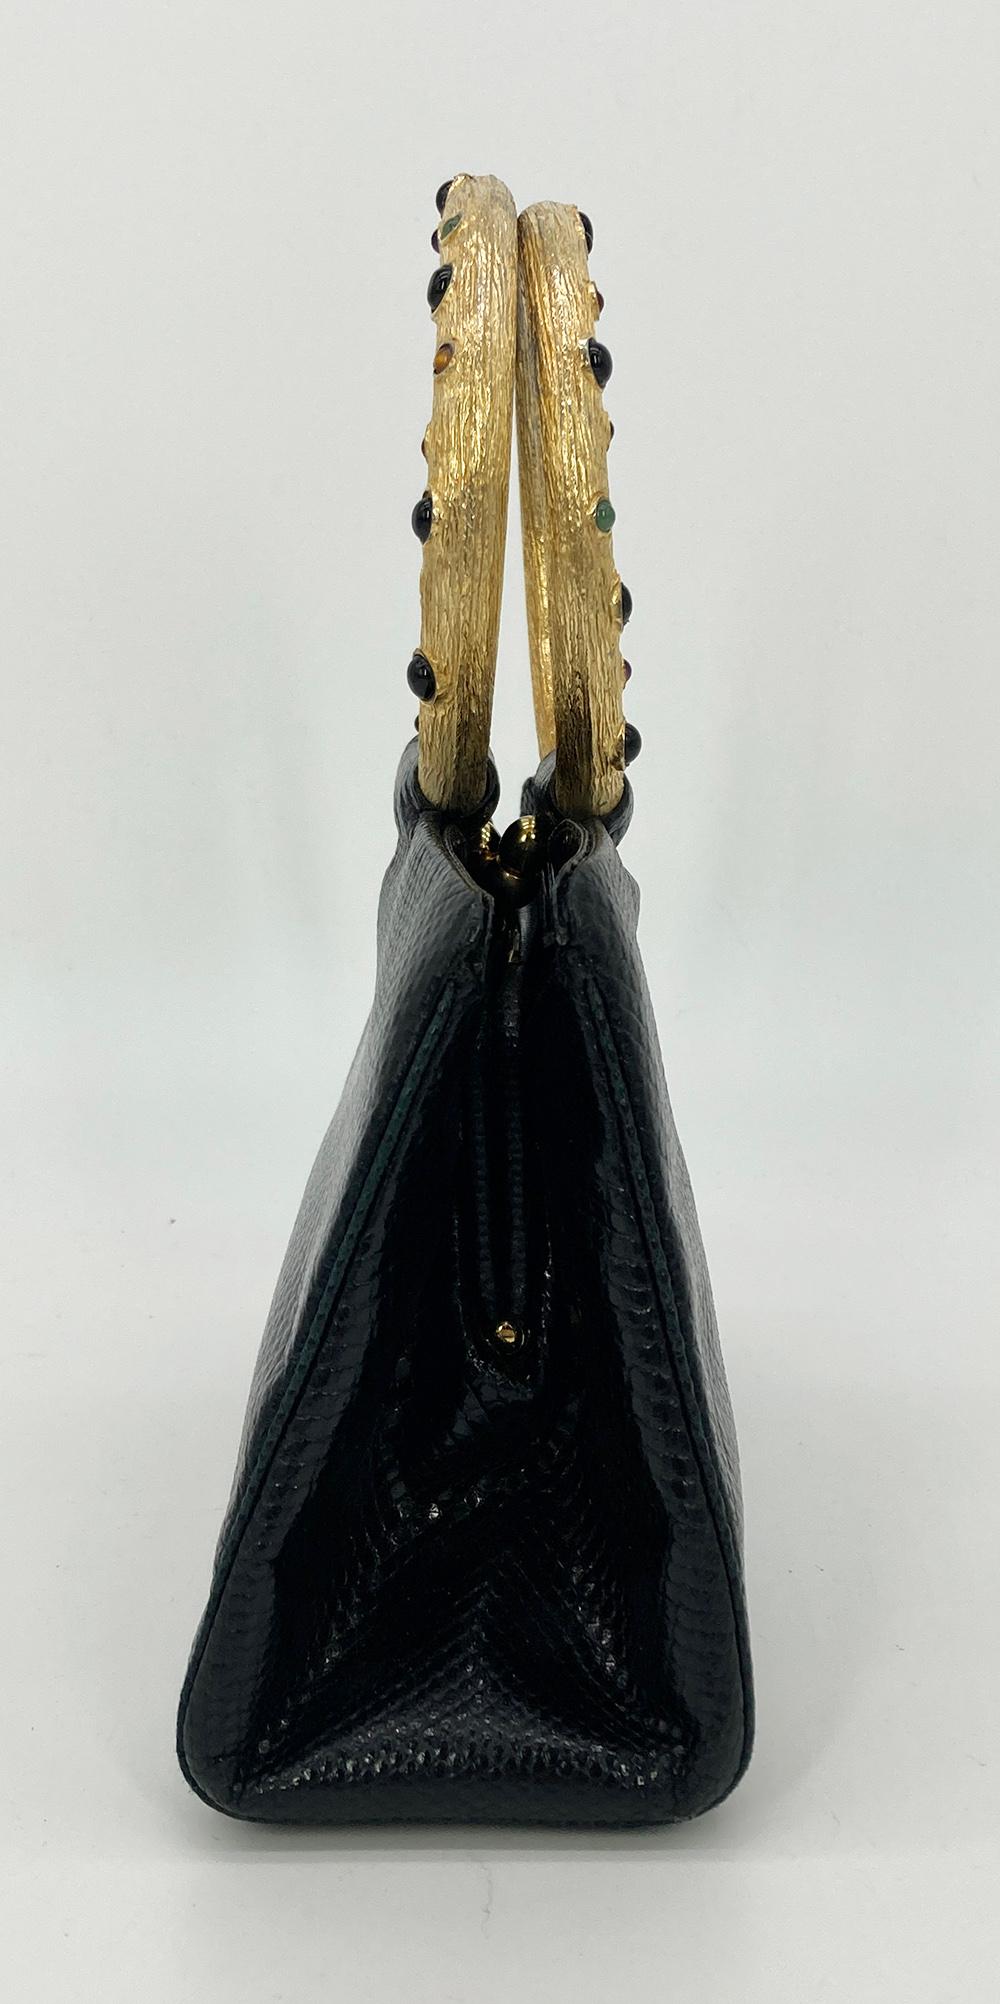 Judith Leiber Black Lizard Round Gold Gemstone Top Handle Bag in fair condition. Black lizard leather trimmed with gold hardware. Double top engraved gold handles with inlaid multi color gemstones. Two exterior side slit pockets. Main storage